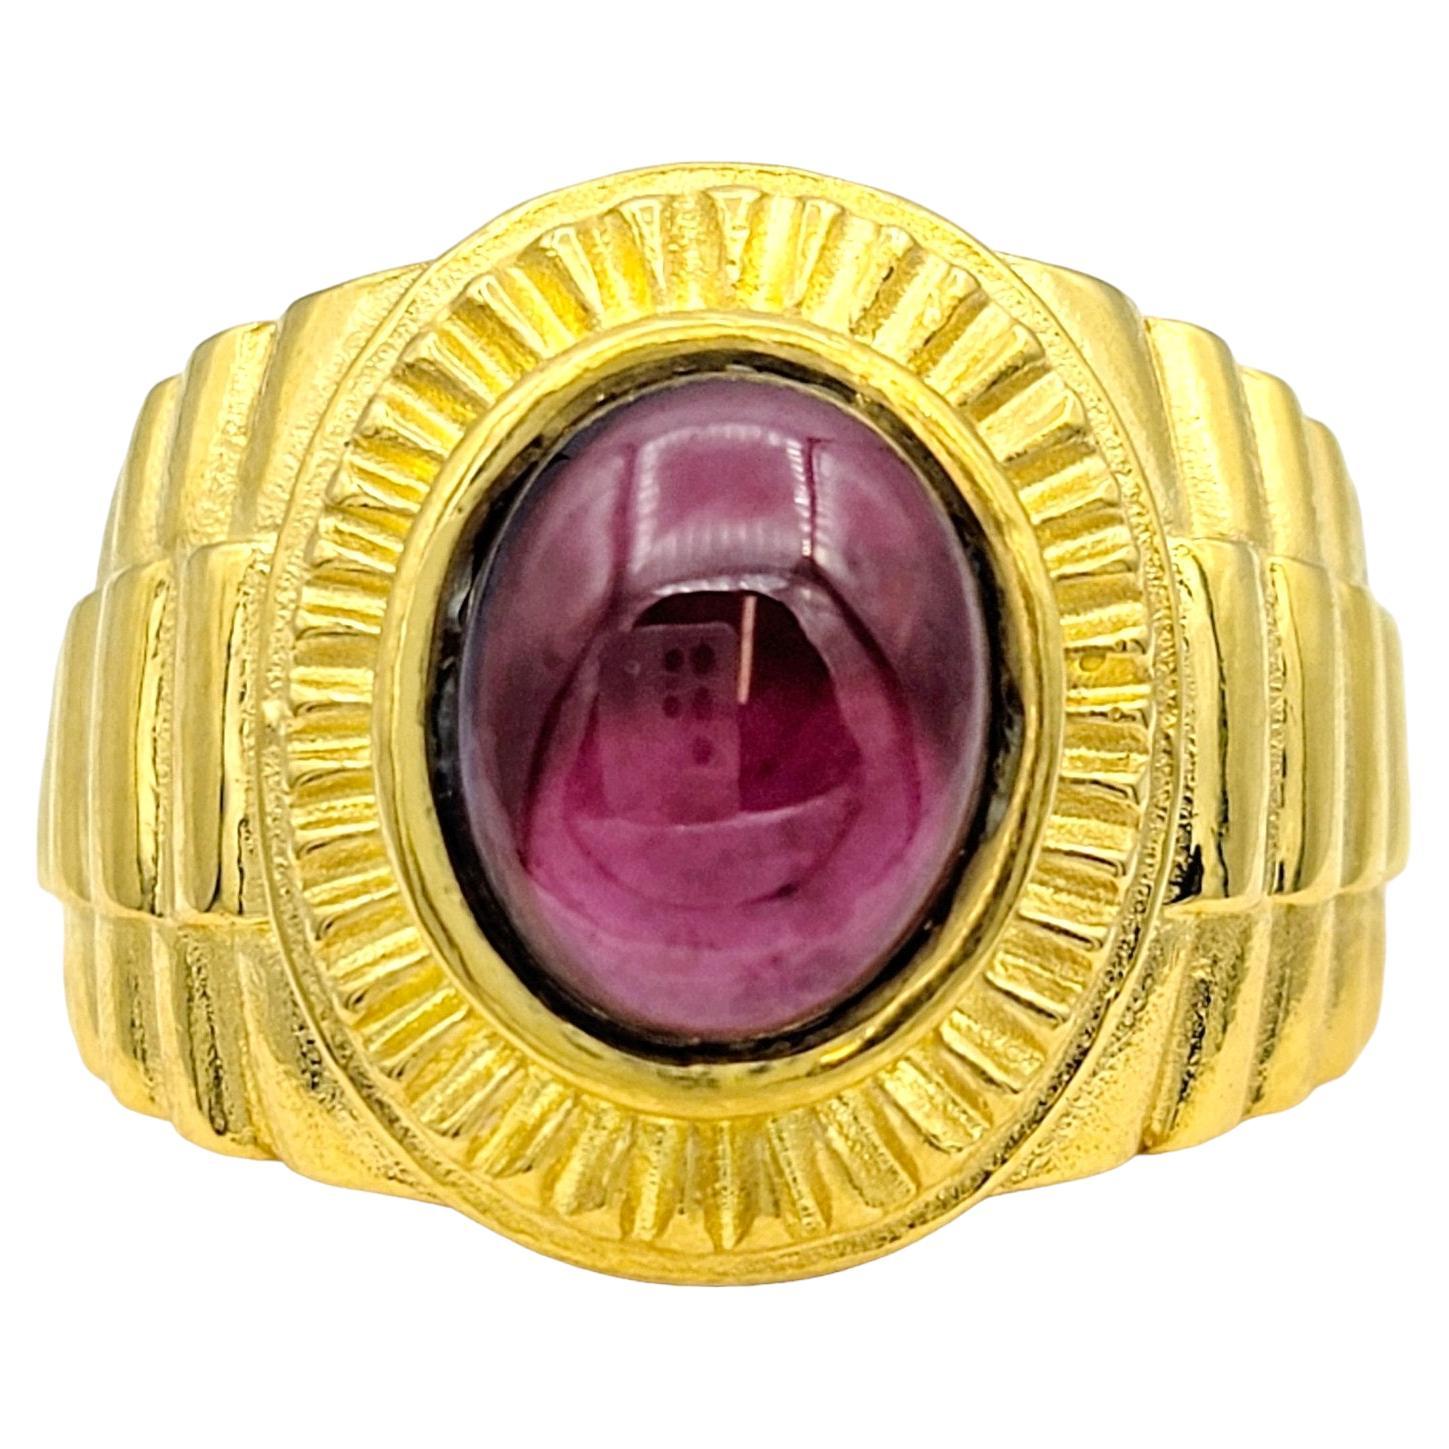 2.50 Carat Oval Cabochon Garnet Solitaire Cocktail Ring in 24 Karat Yellow Gold